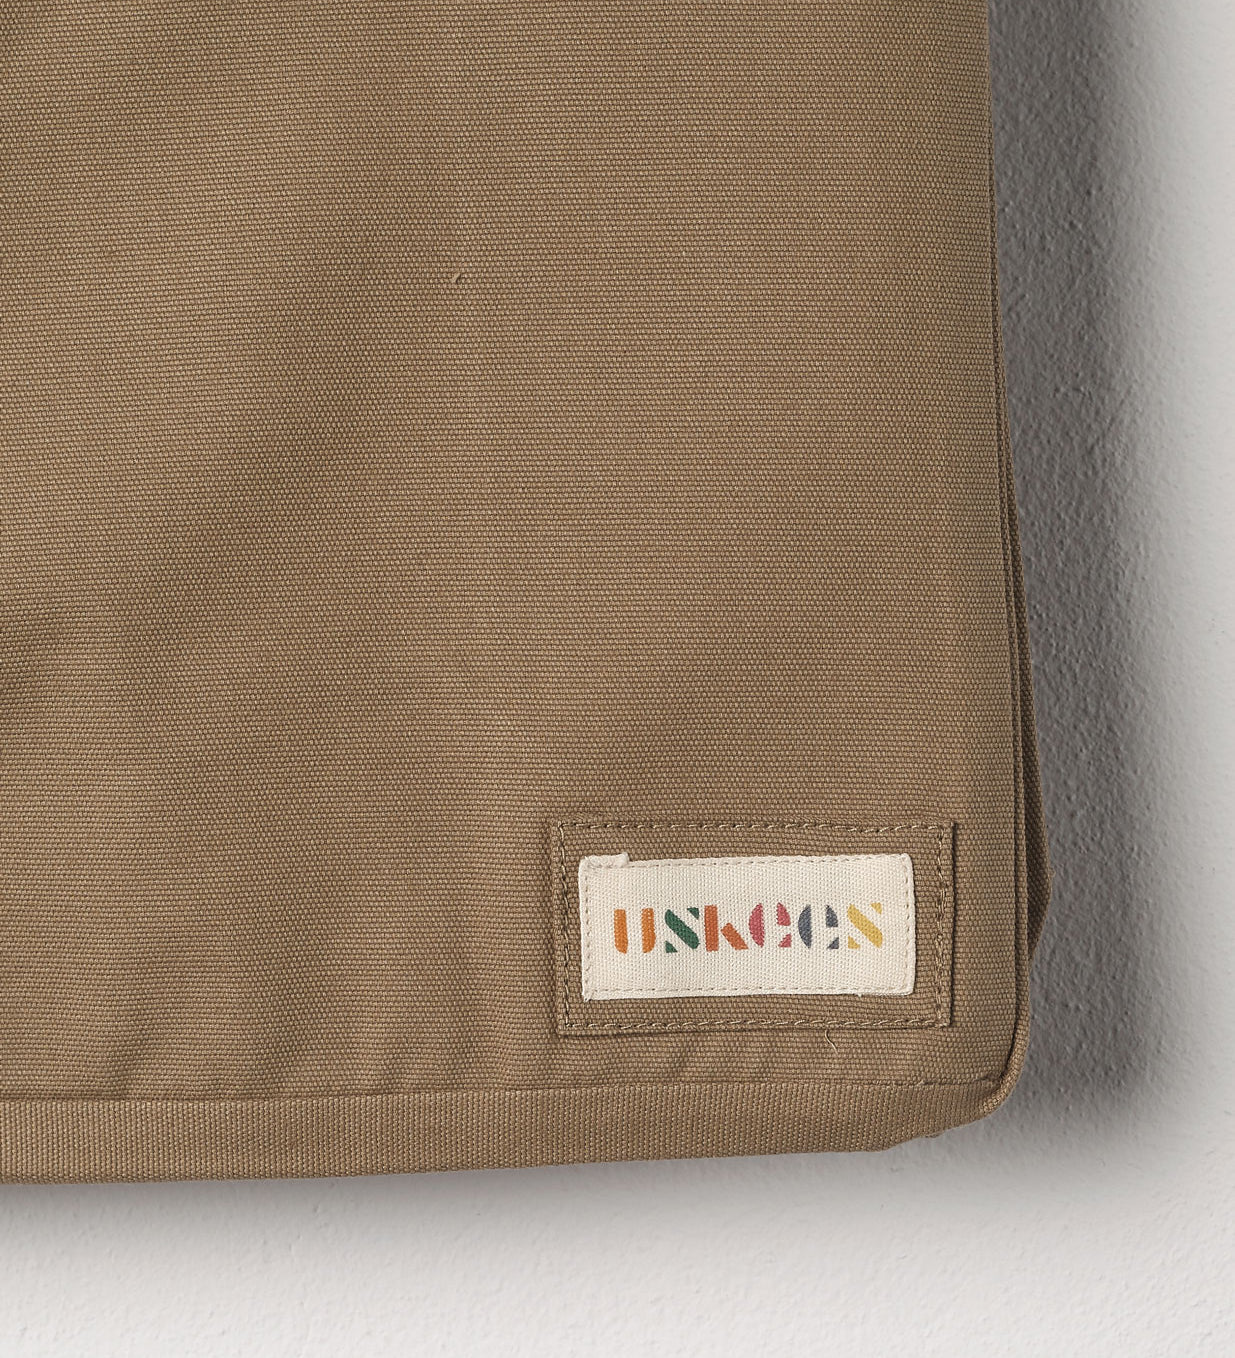 Close-up view of Uskees #4001 large tote bag in khaki showing the Uskees woven label.